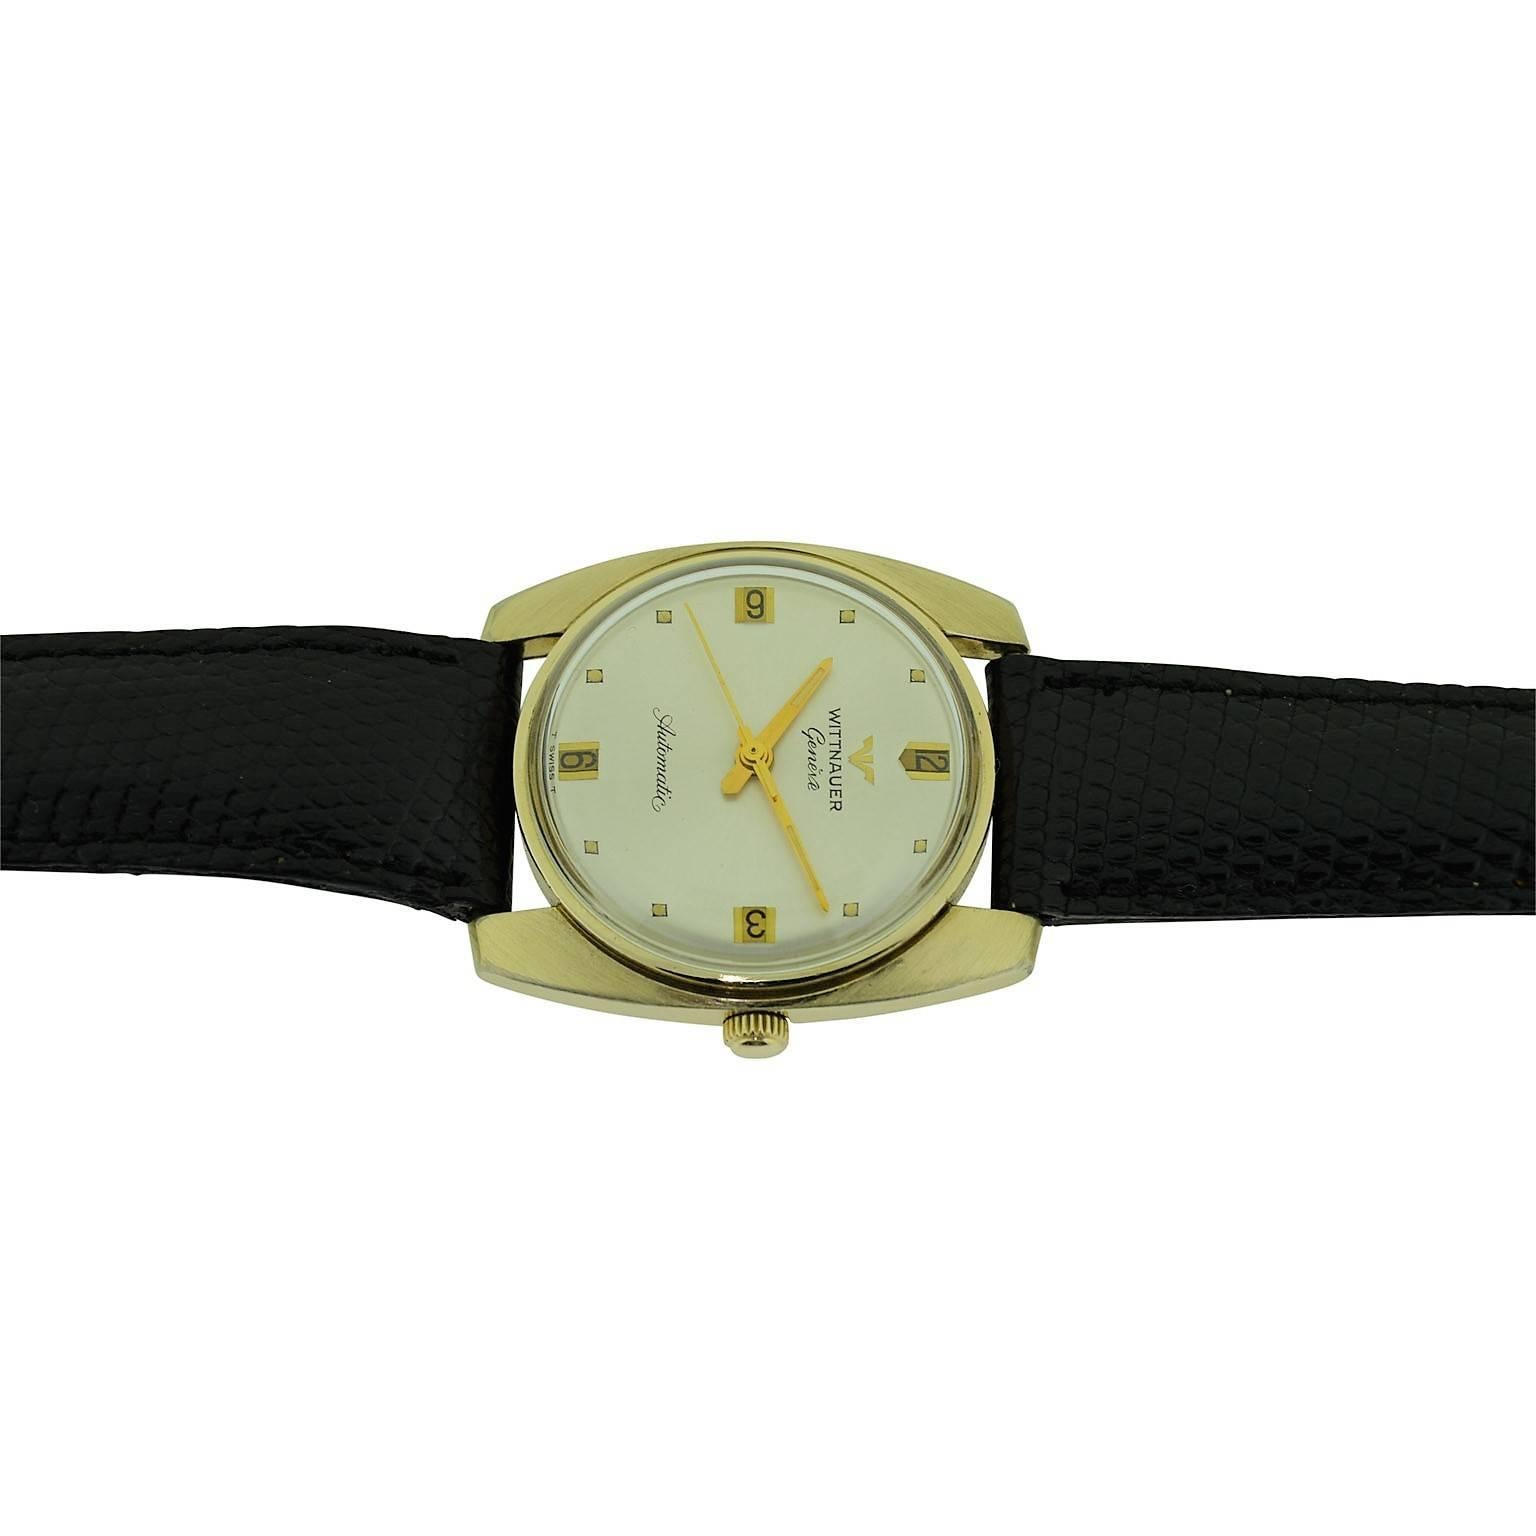 Art Deco Wittnauer Gold Filled Dress Style Automatic Winding Watch, circa 1960s